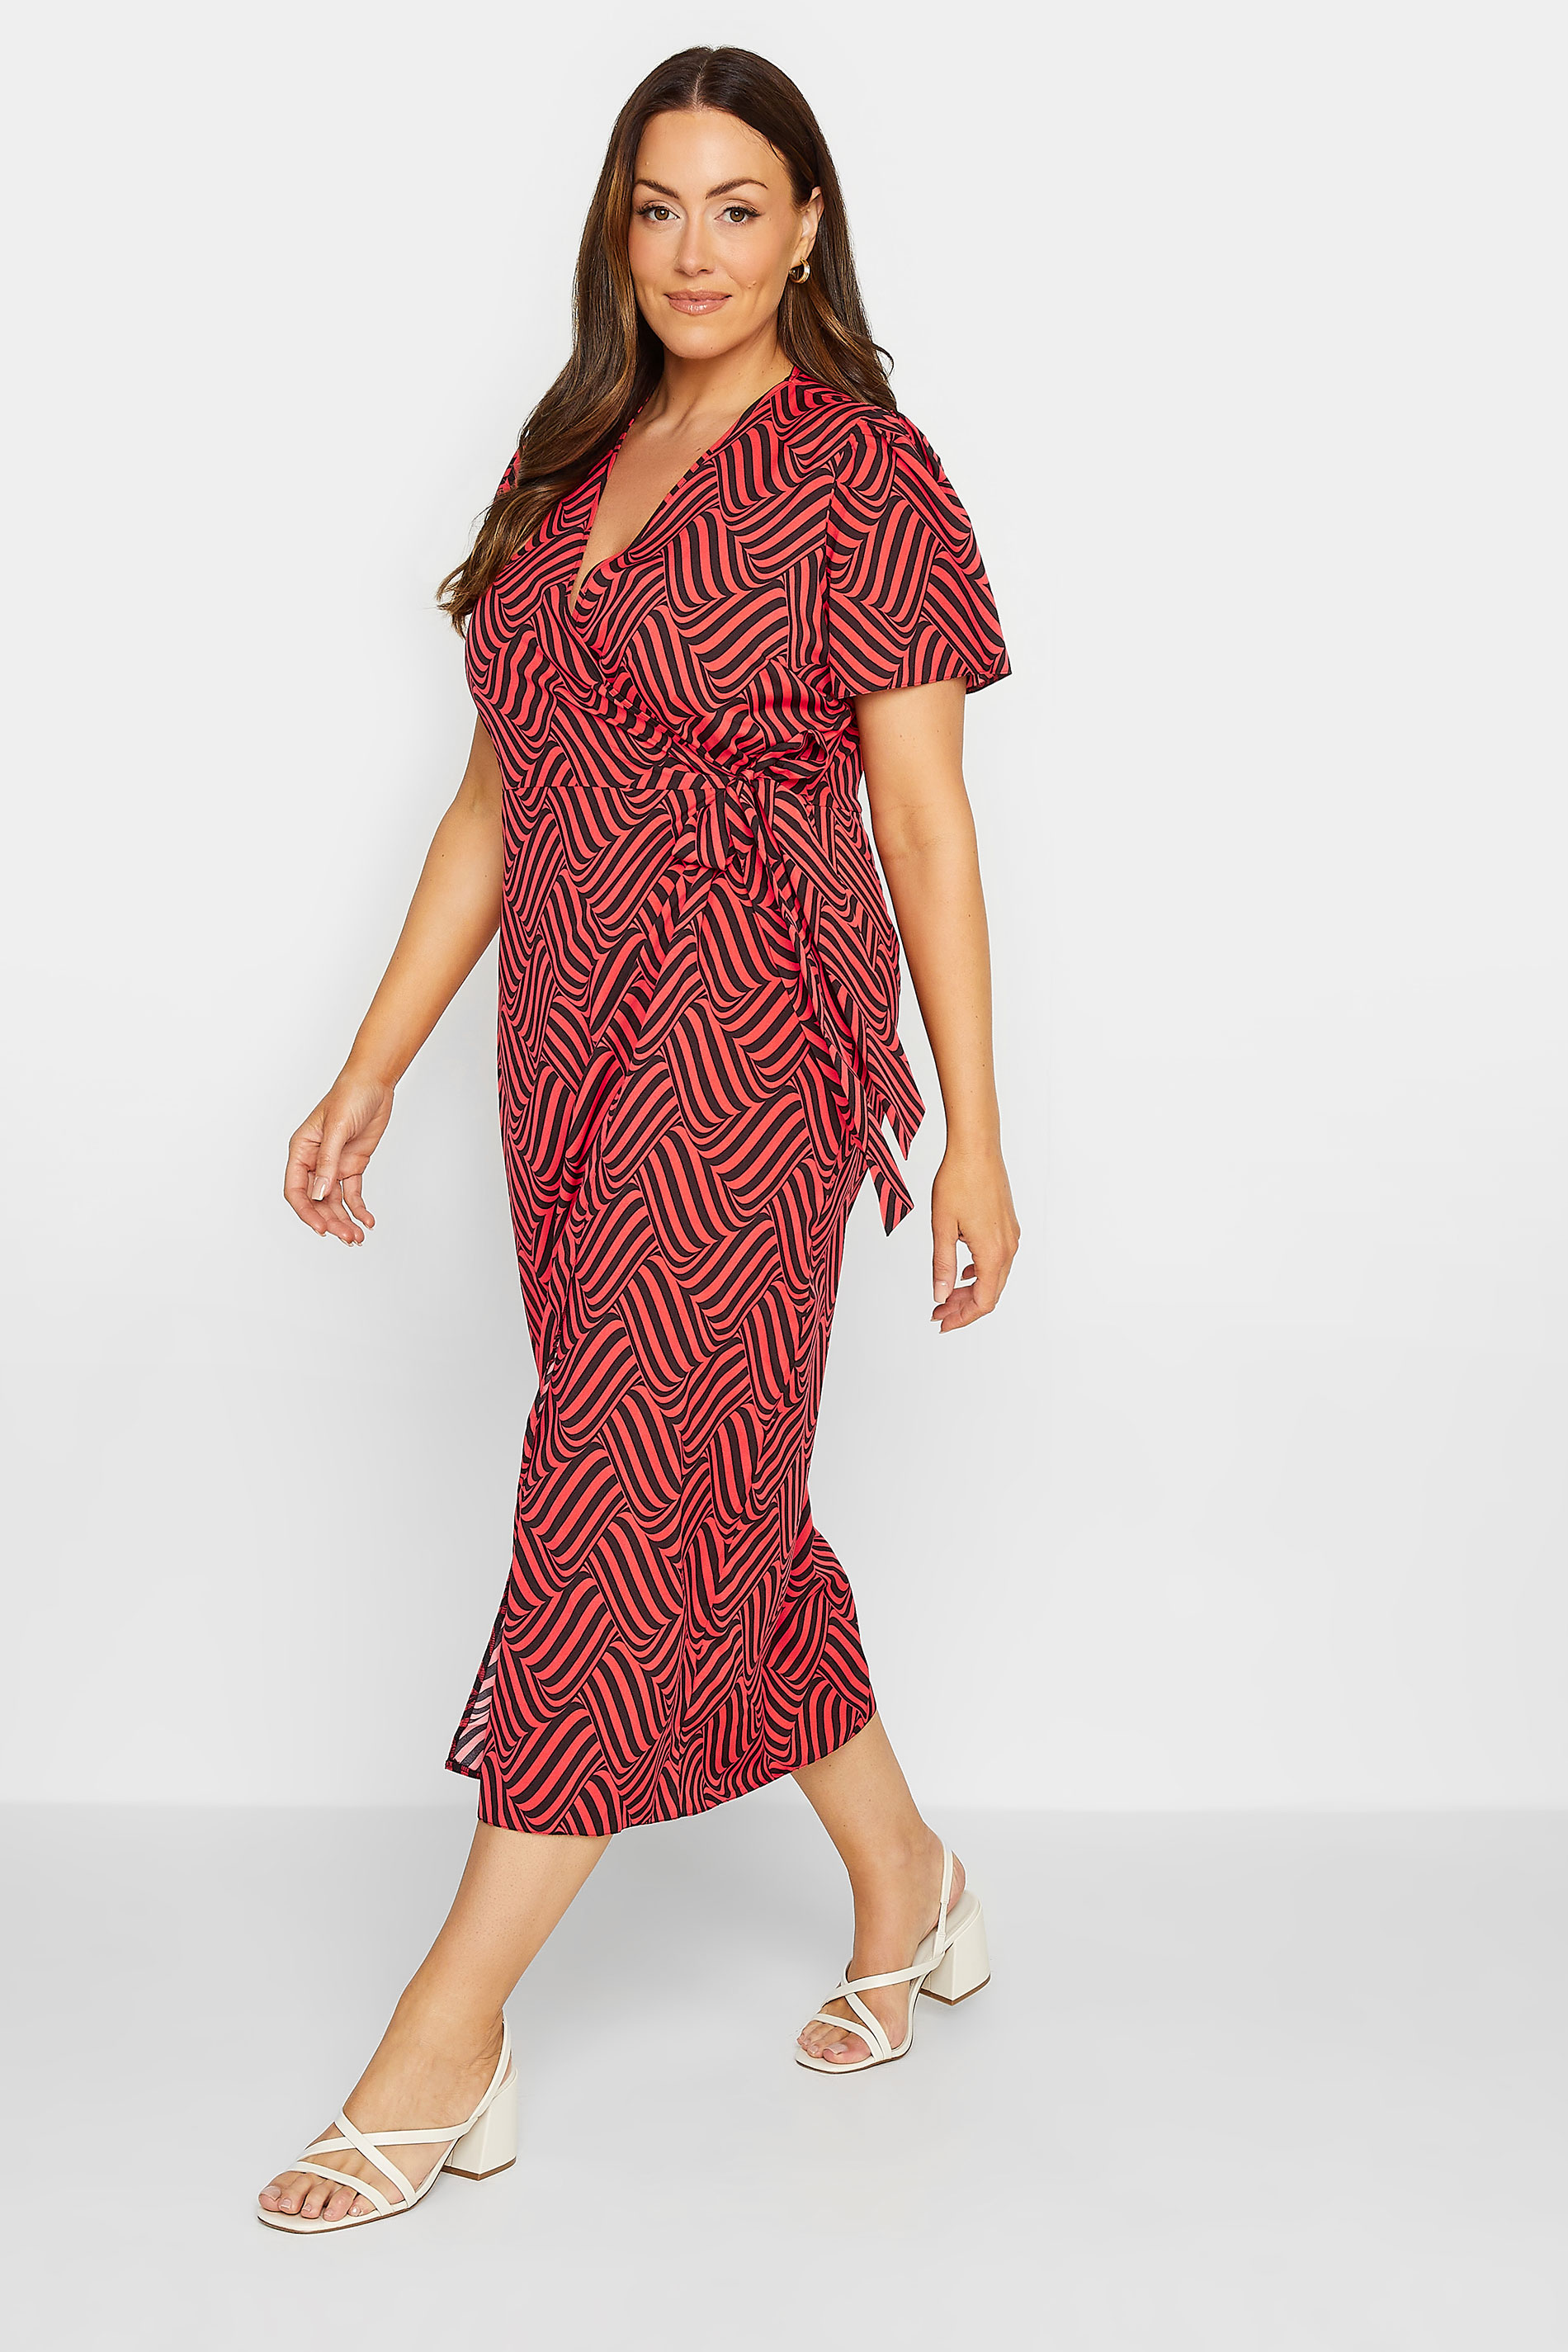 M&Co Red Abstract Stripe Wrap Dress | M&Co 1